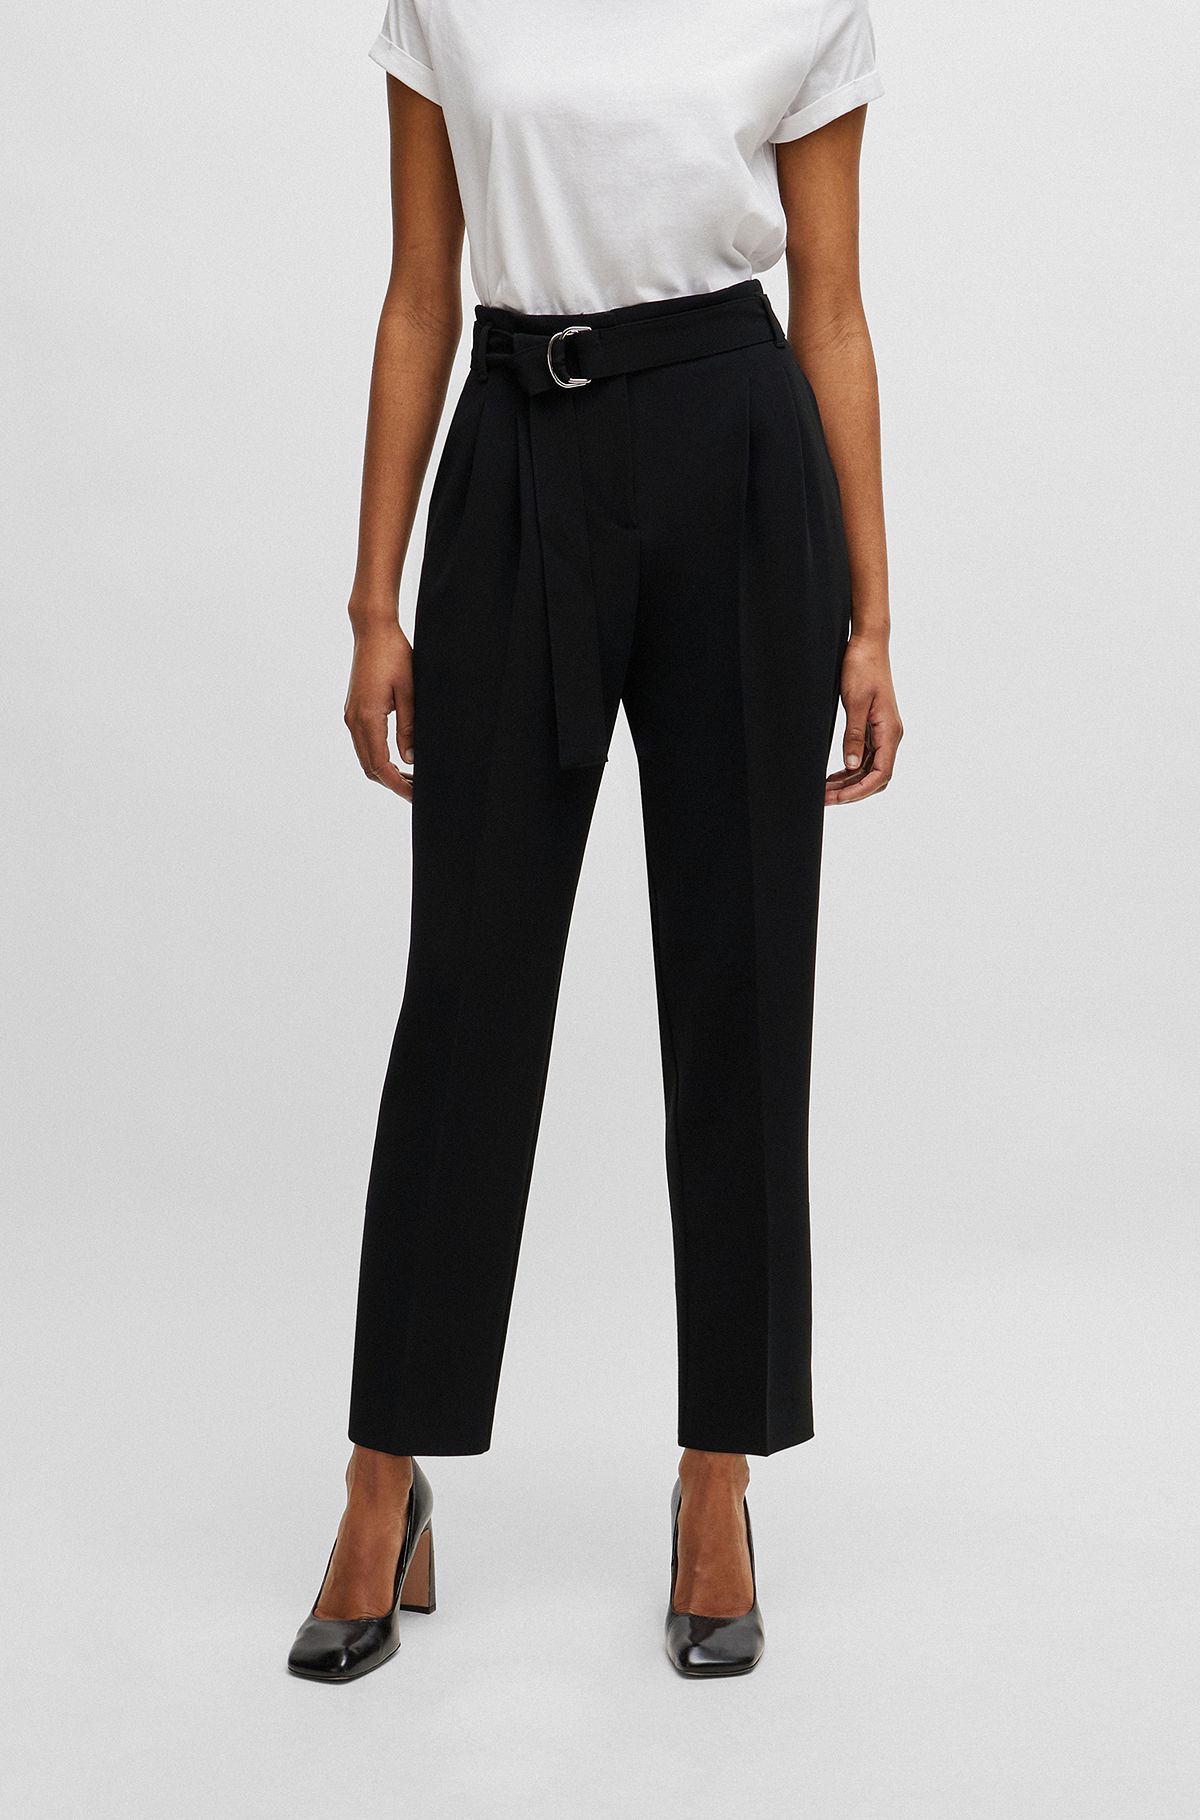 Boss Lady Black Cotton Front Button Formal Pant For Women